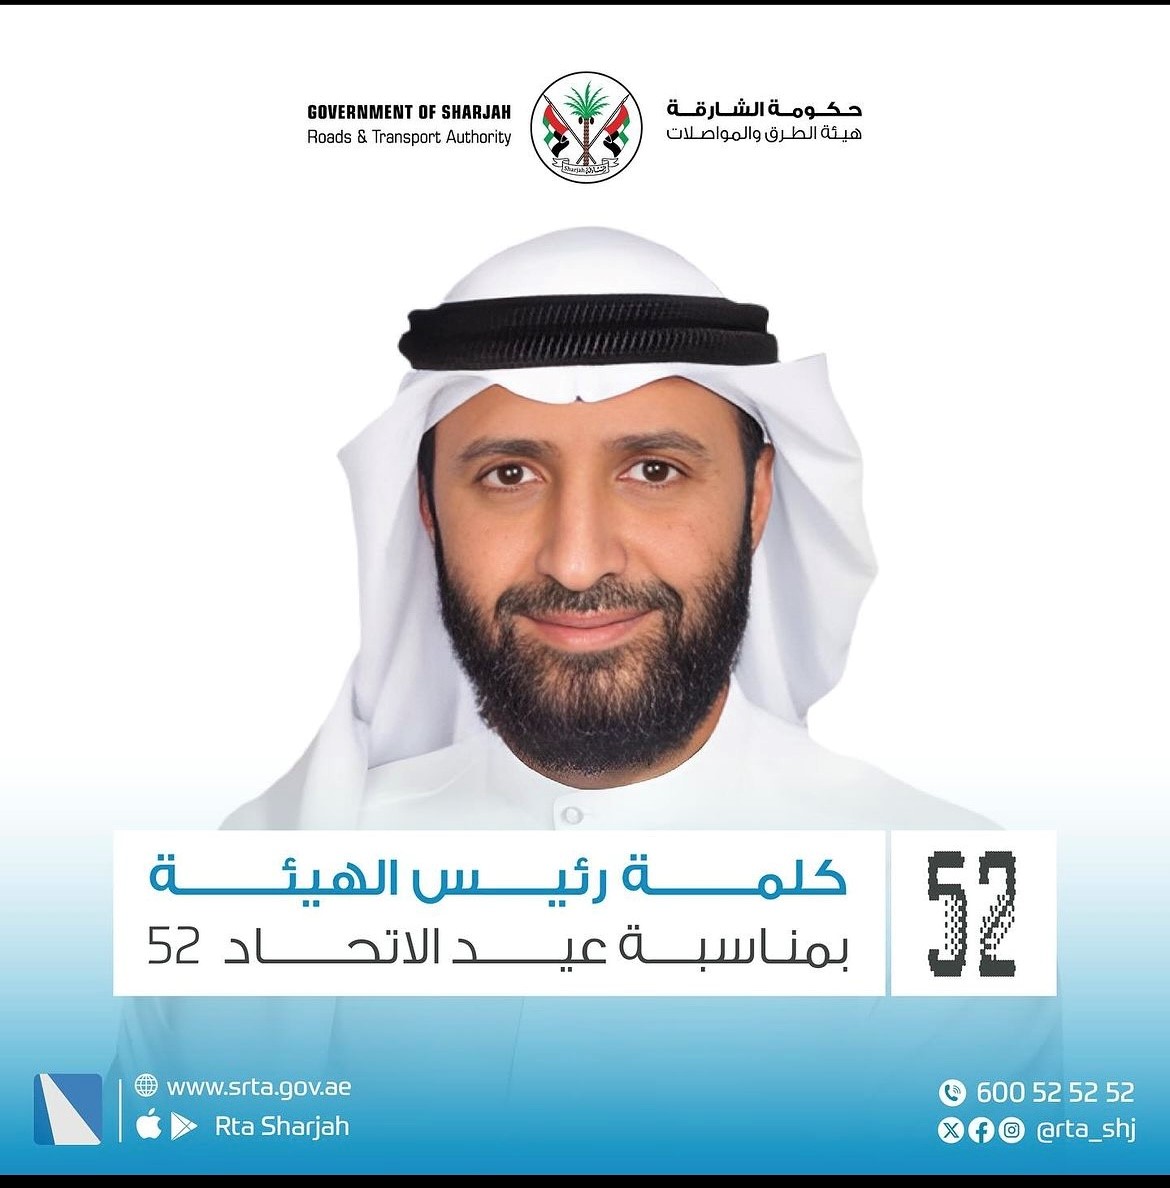 Speech of the Chairman of the Authority on the occasion of the 52nd National Day